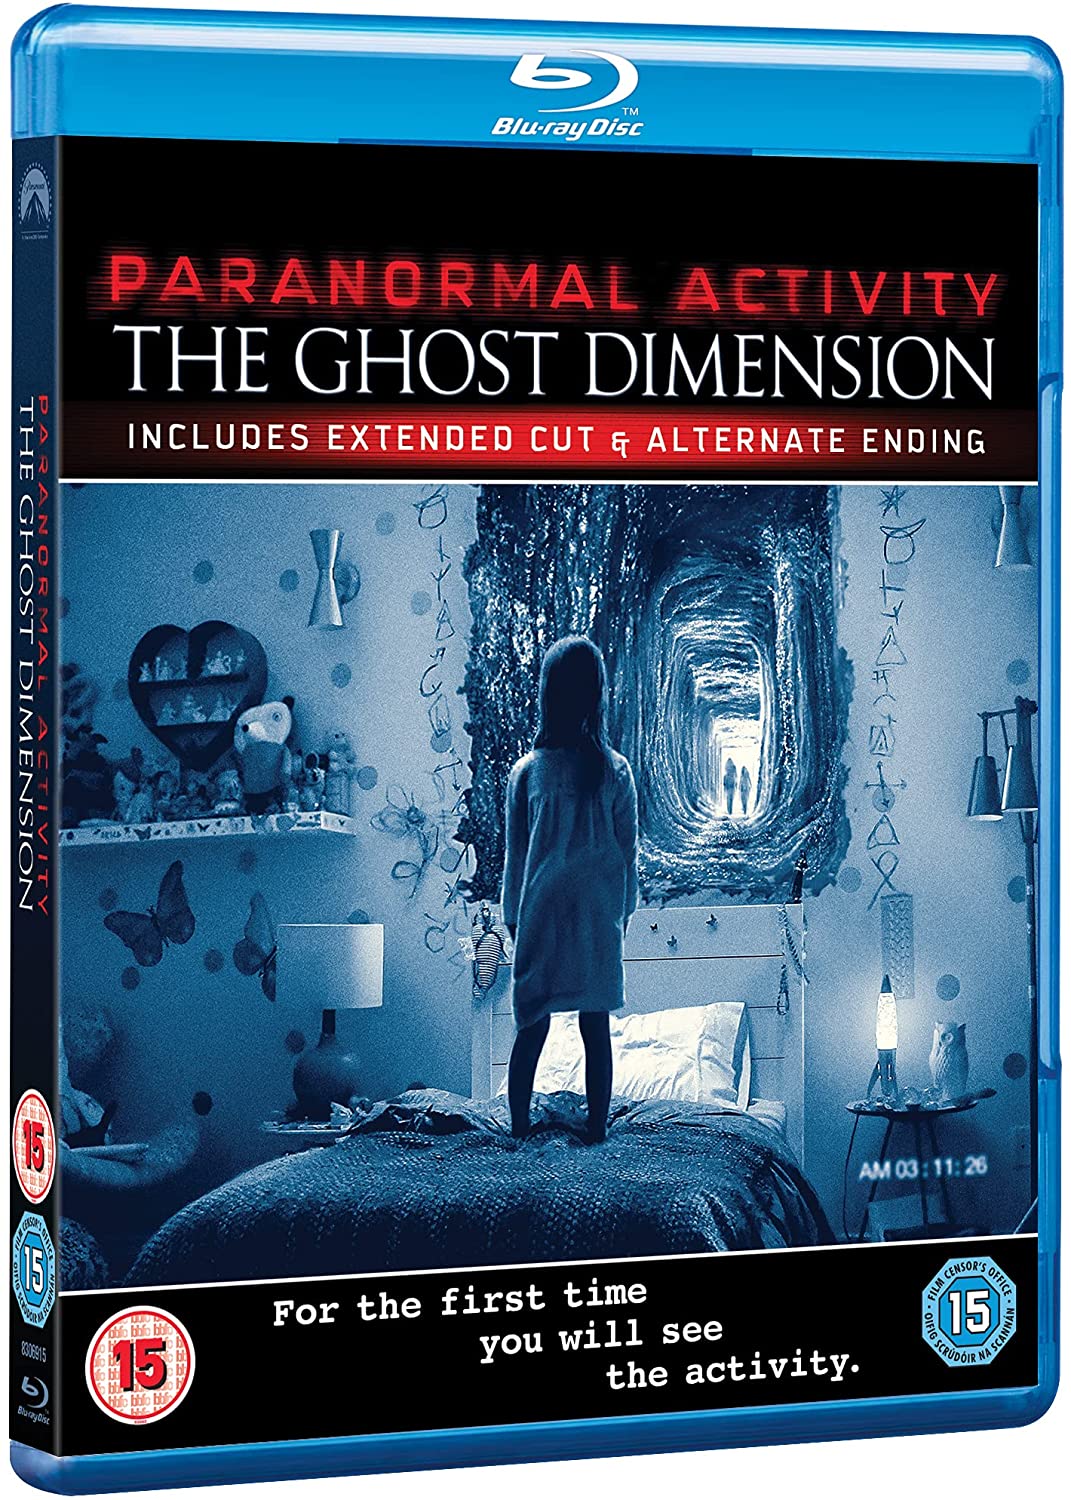 Paranormal Activity: The Ghost Dimension [2015] - Horror/Thriller [BLU-RAY]